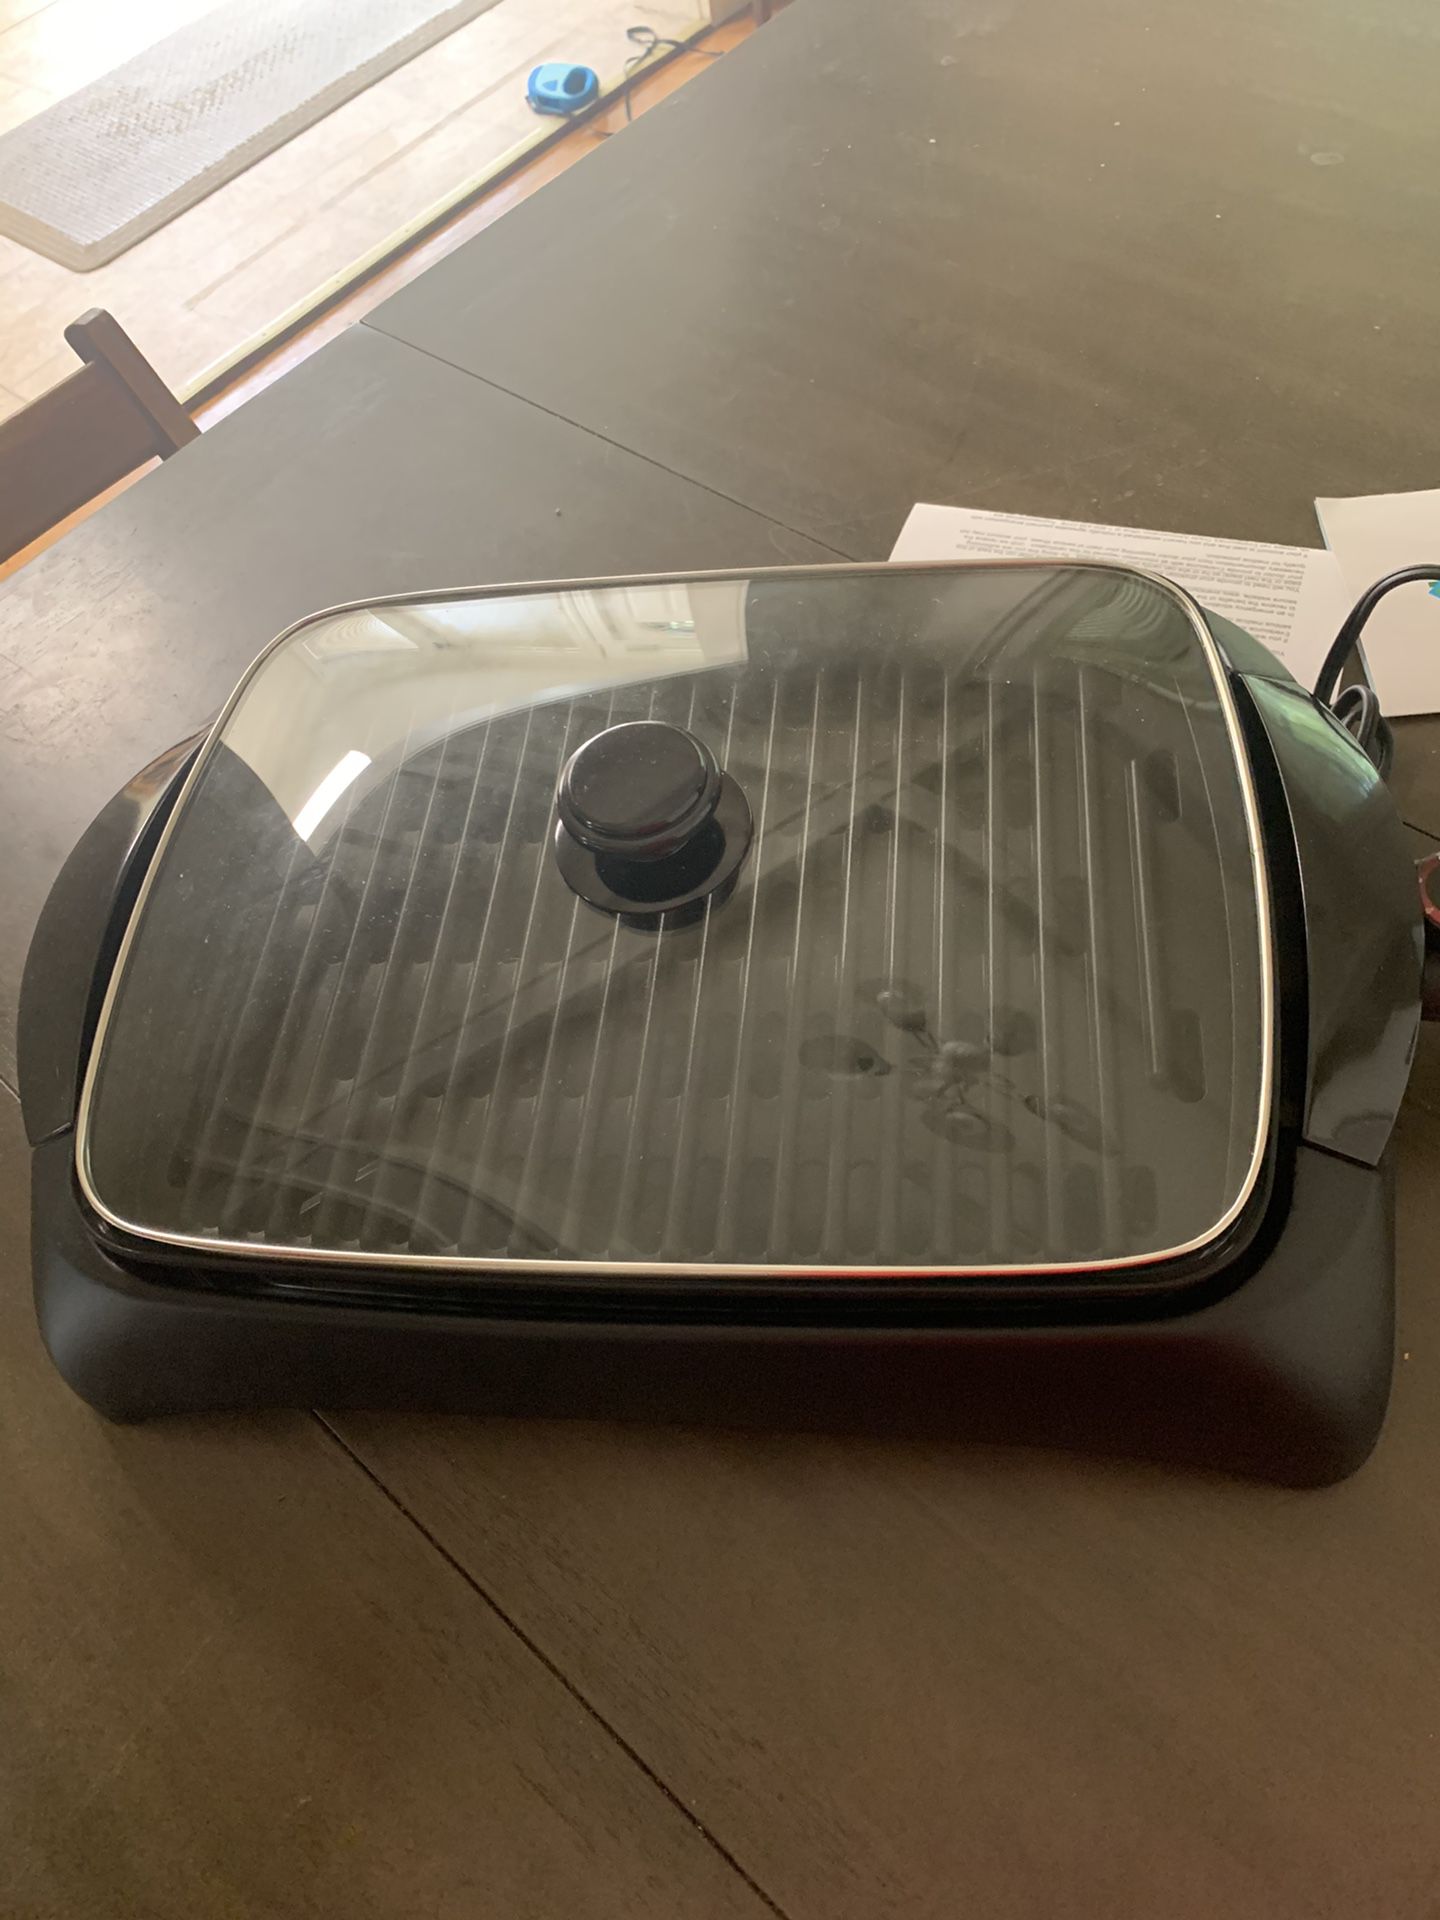 Brand new electric grill. Never used